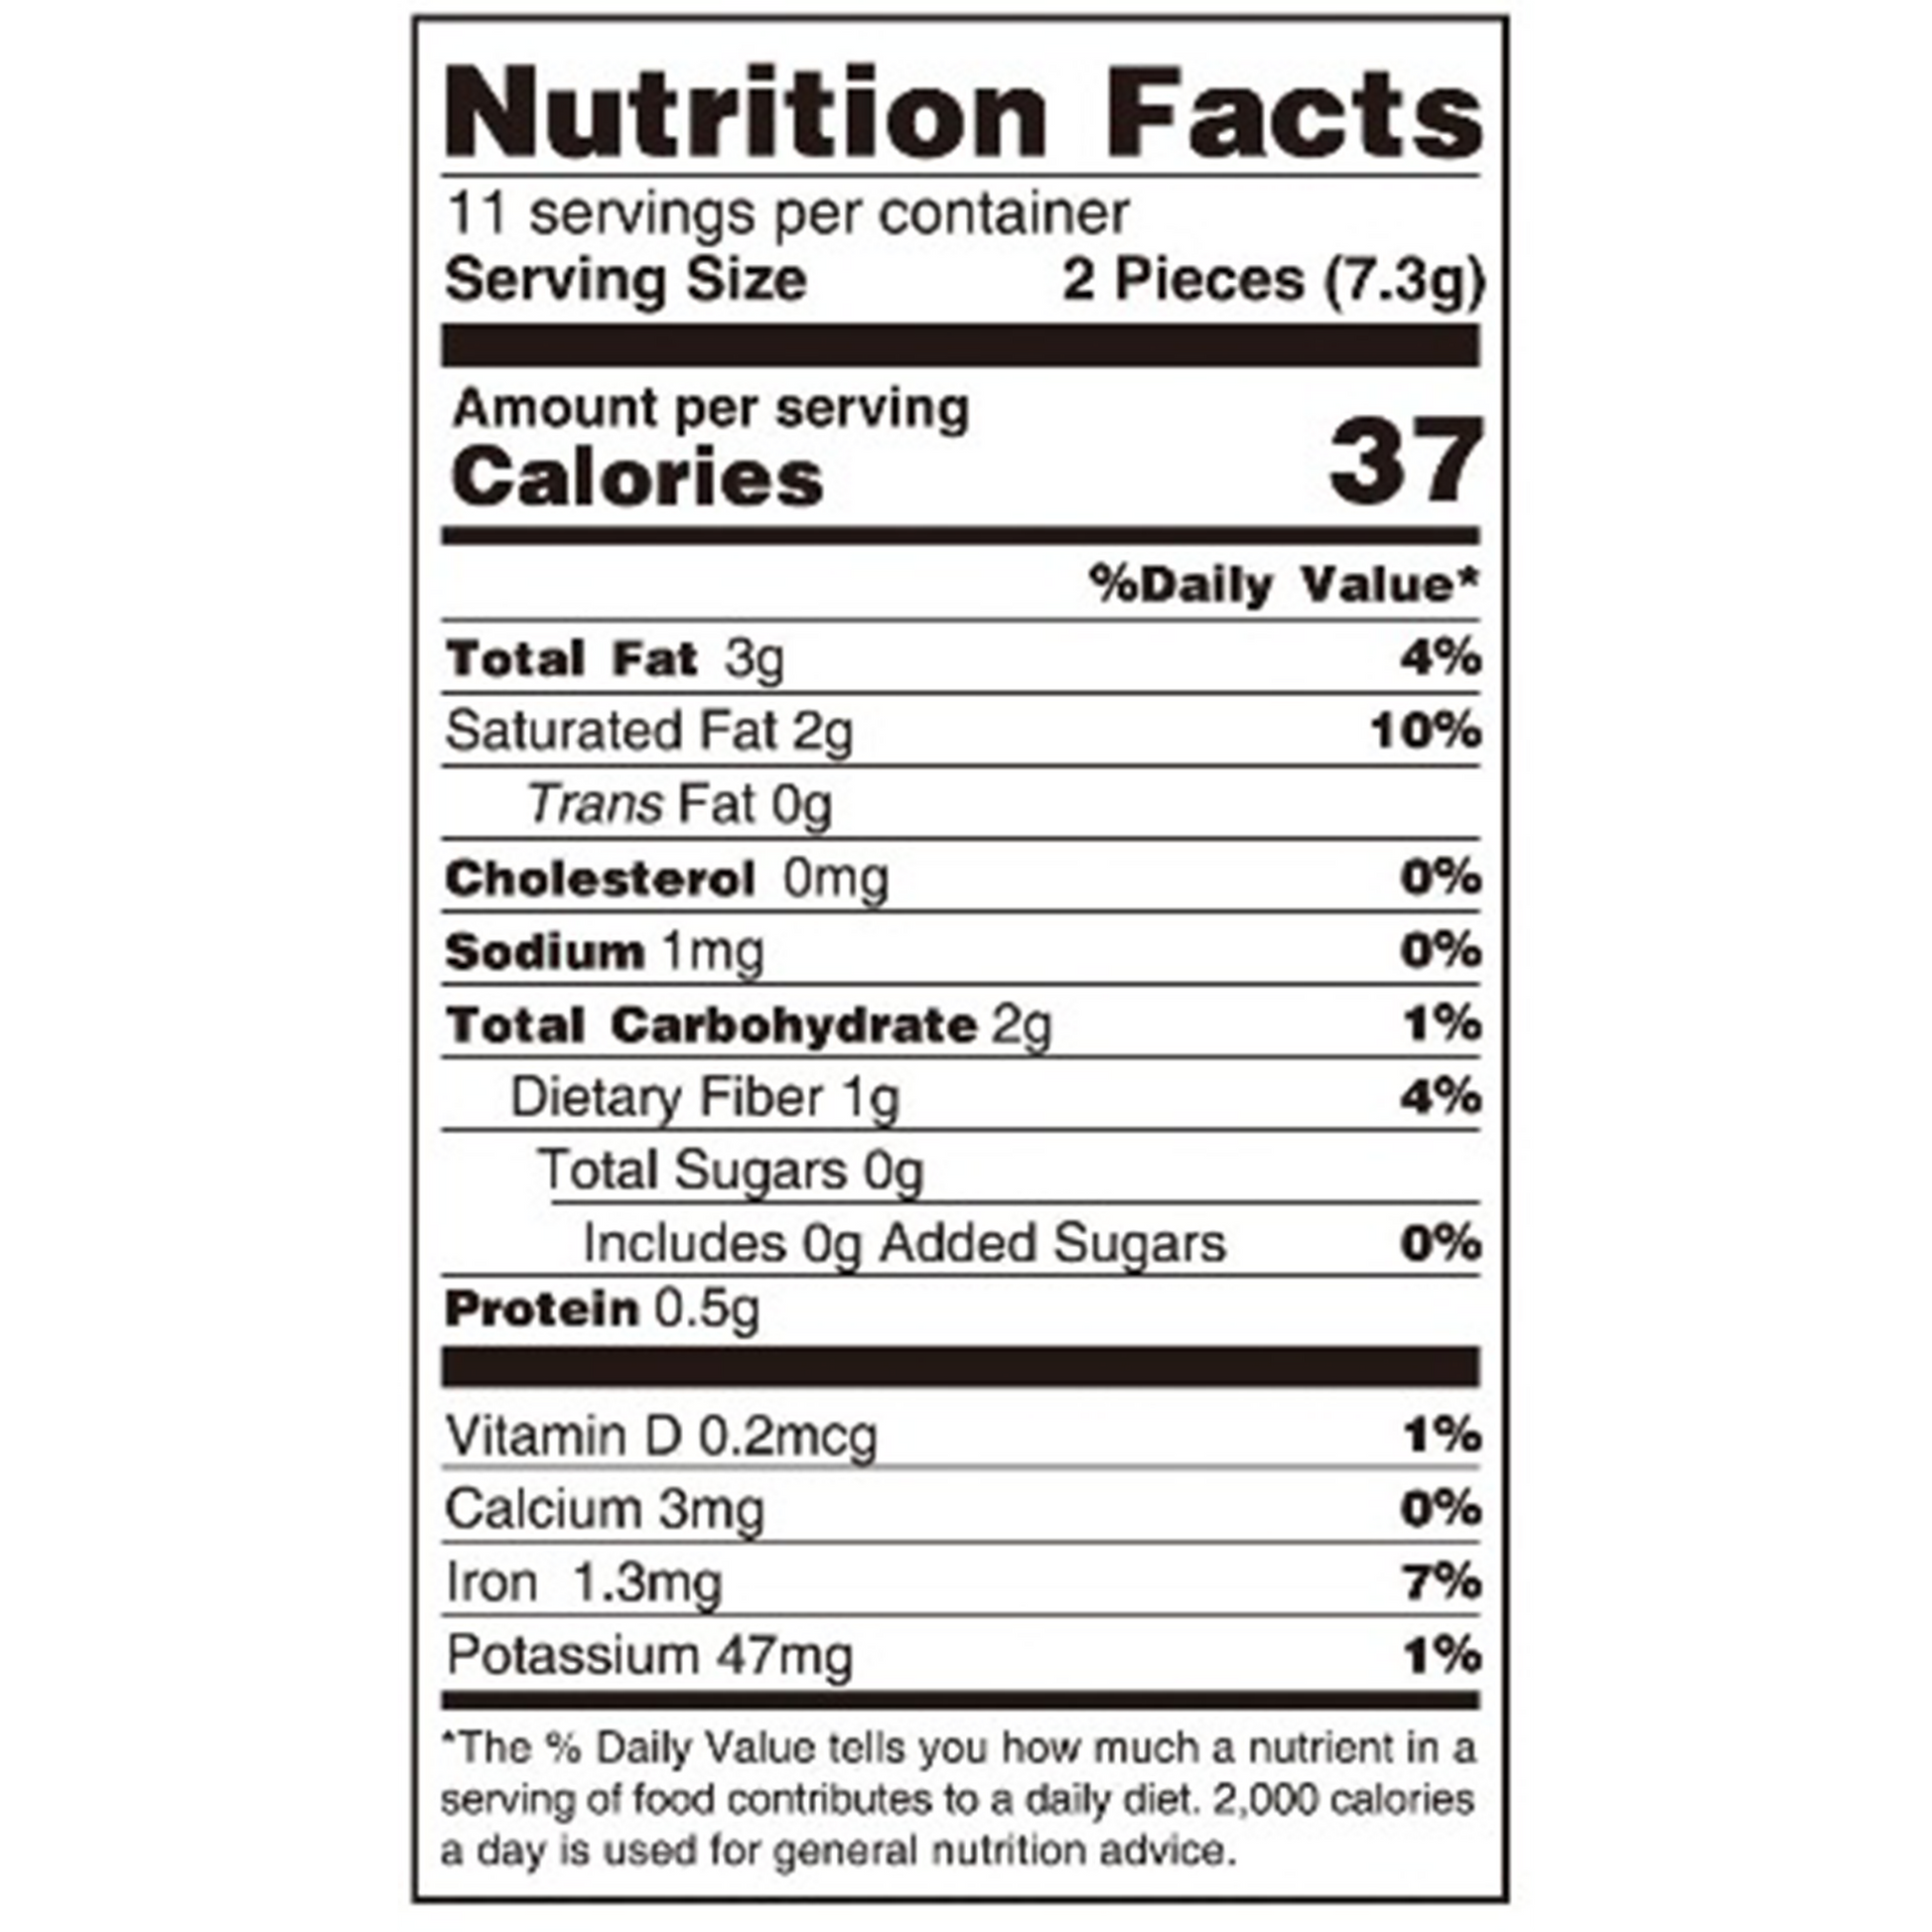 Image of the nutrition facts 